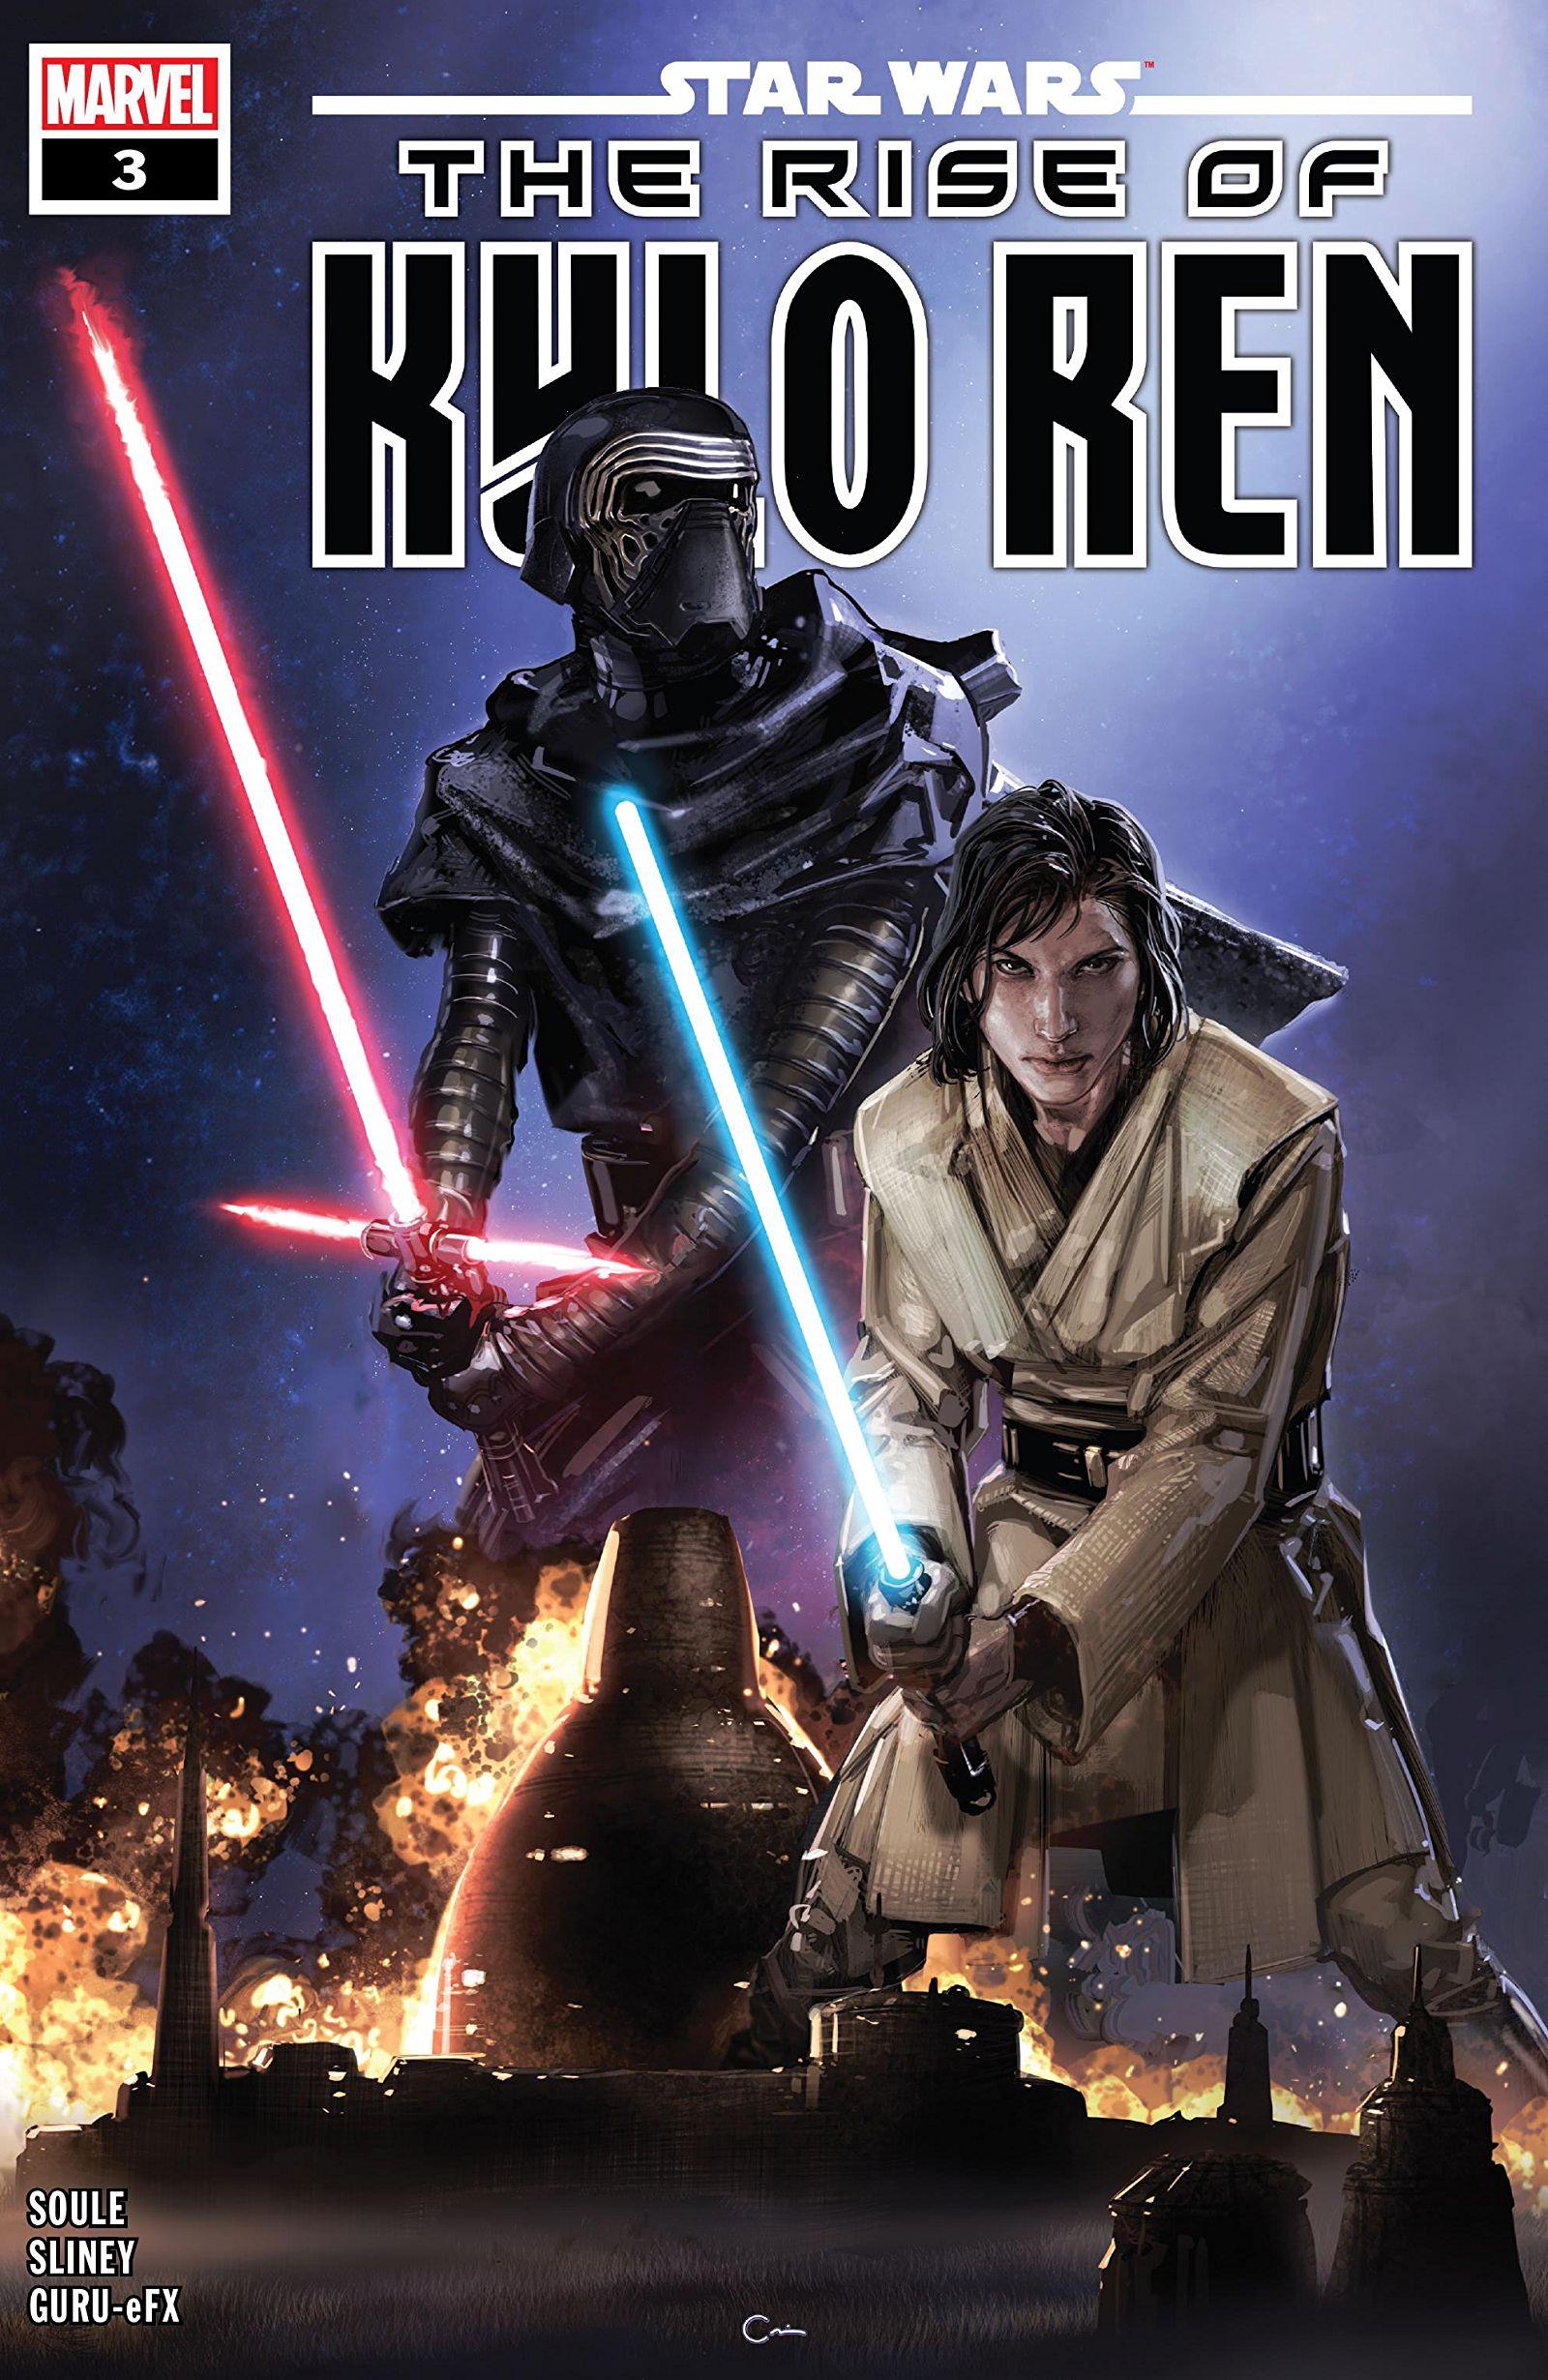 Star Wars: The Rise of Kylo Ren Vol. 1 #3